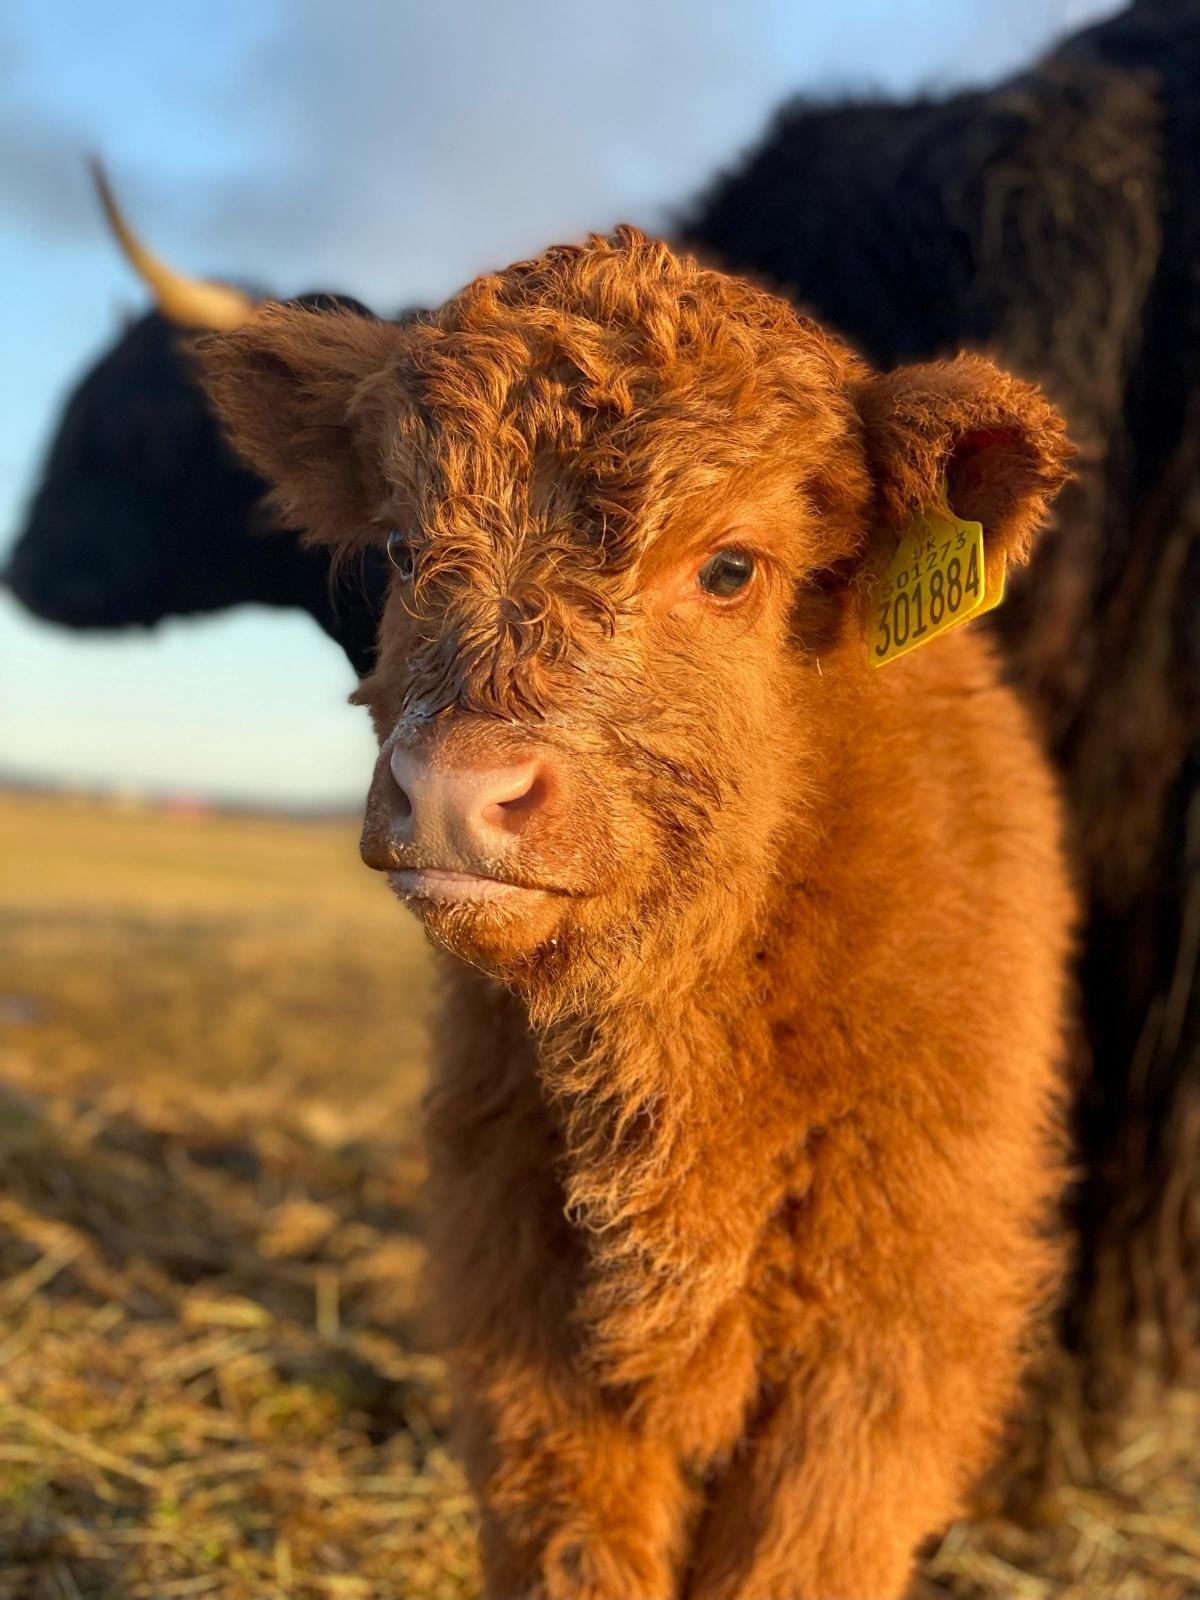 Carianne MacDonald (Ardbhan Fold, North Uist) - Highland bull calf finally enjoys a sunny morning after weeks of gales in North Uist, Outer Hebrides